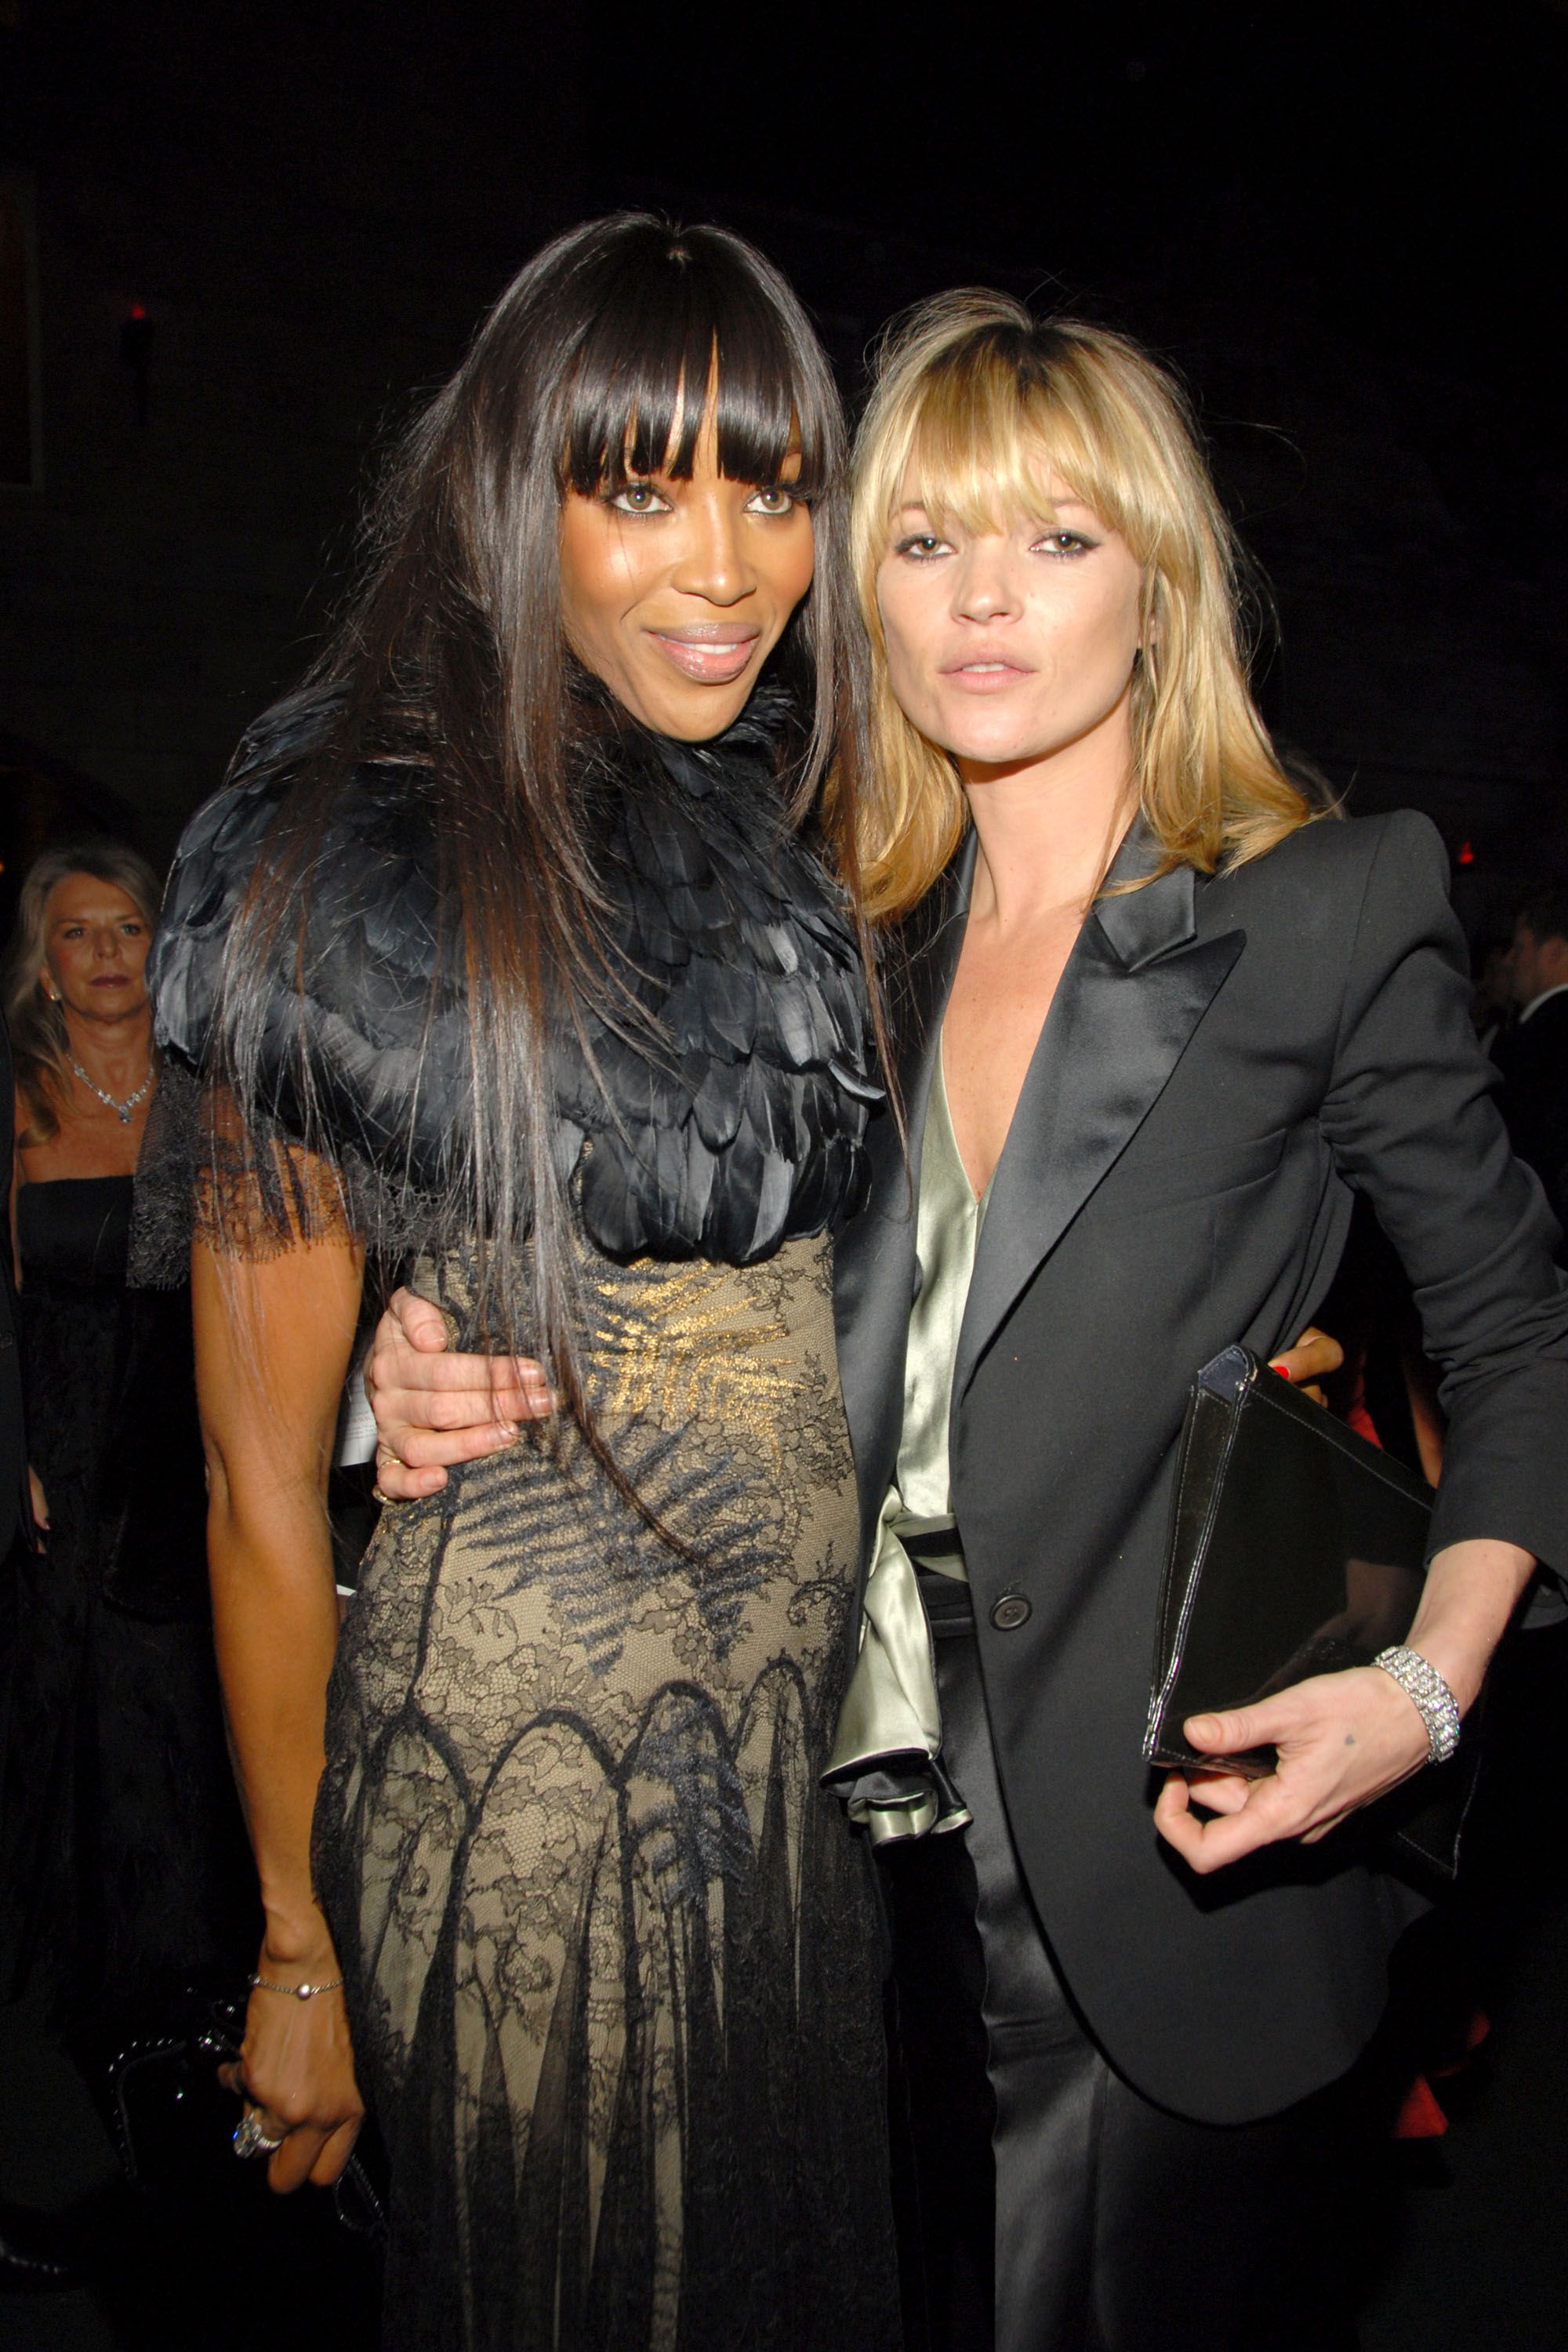 naomi campbell and kate moss 90s